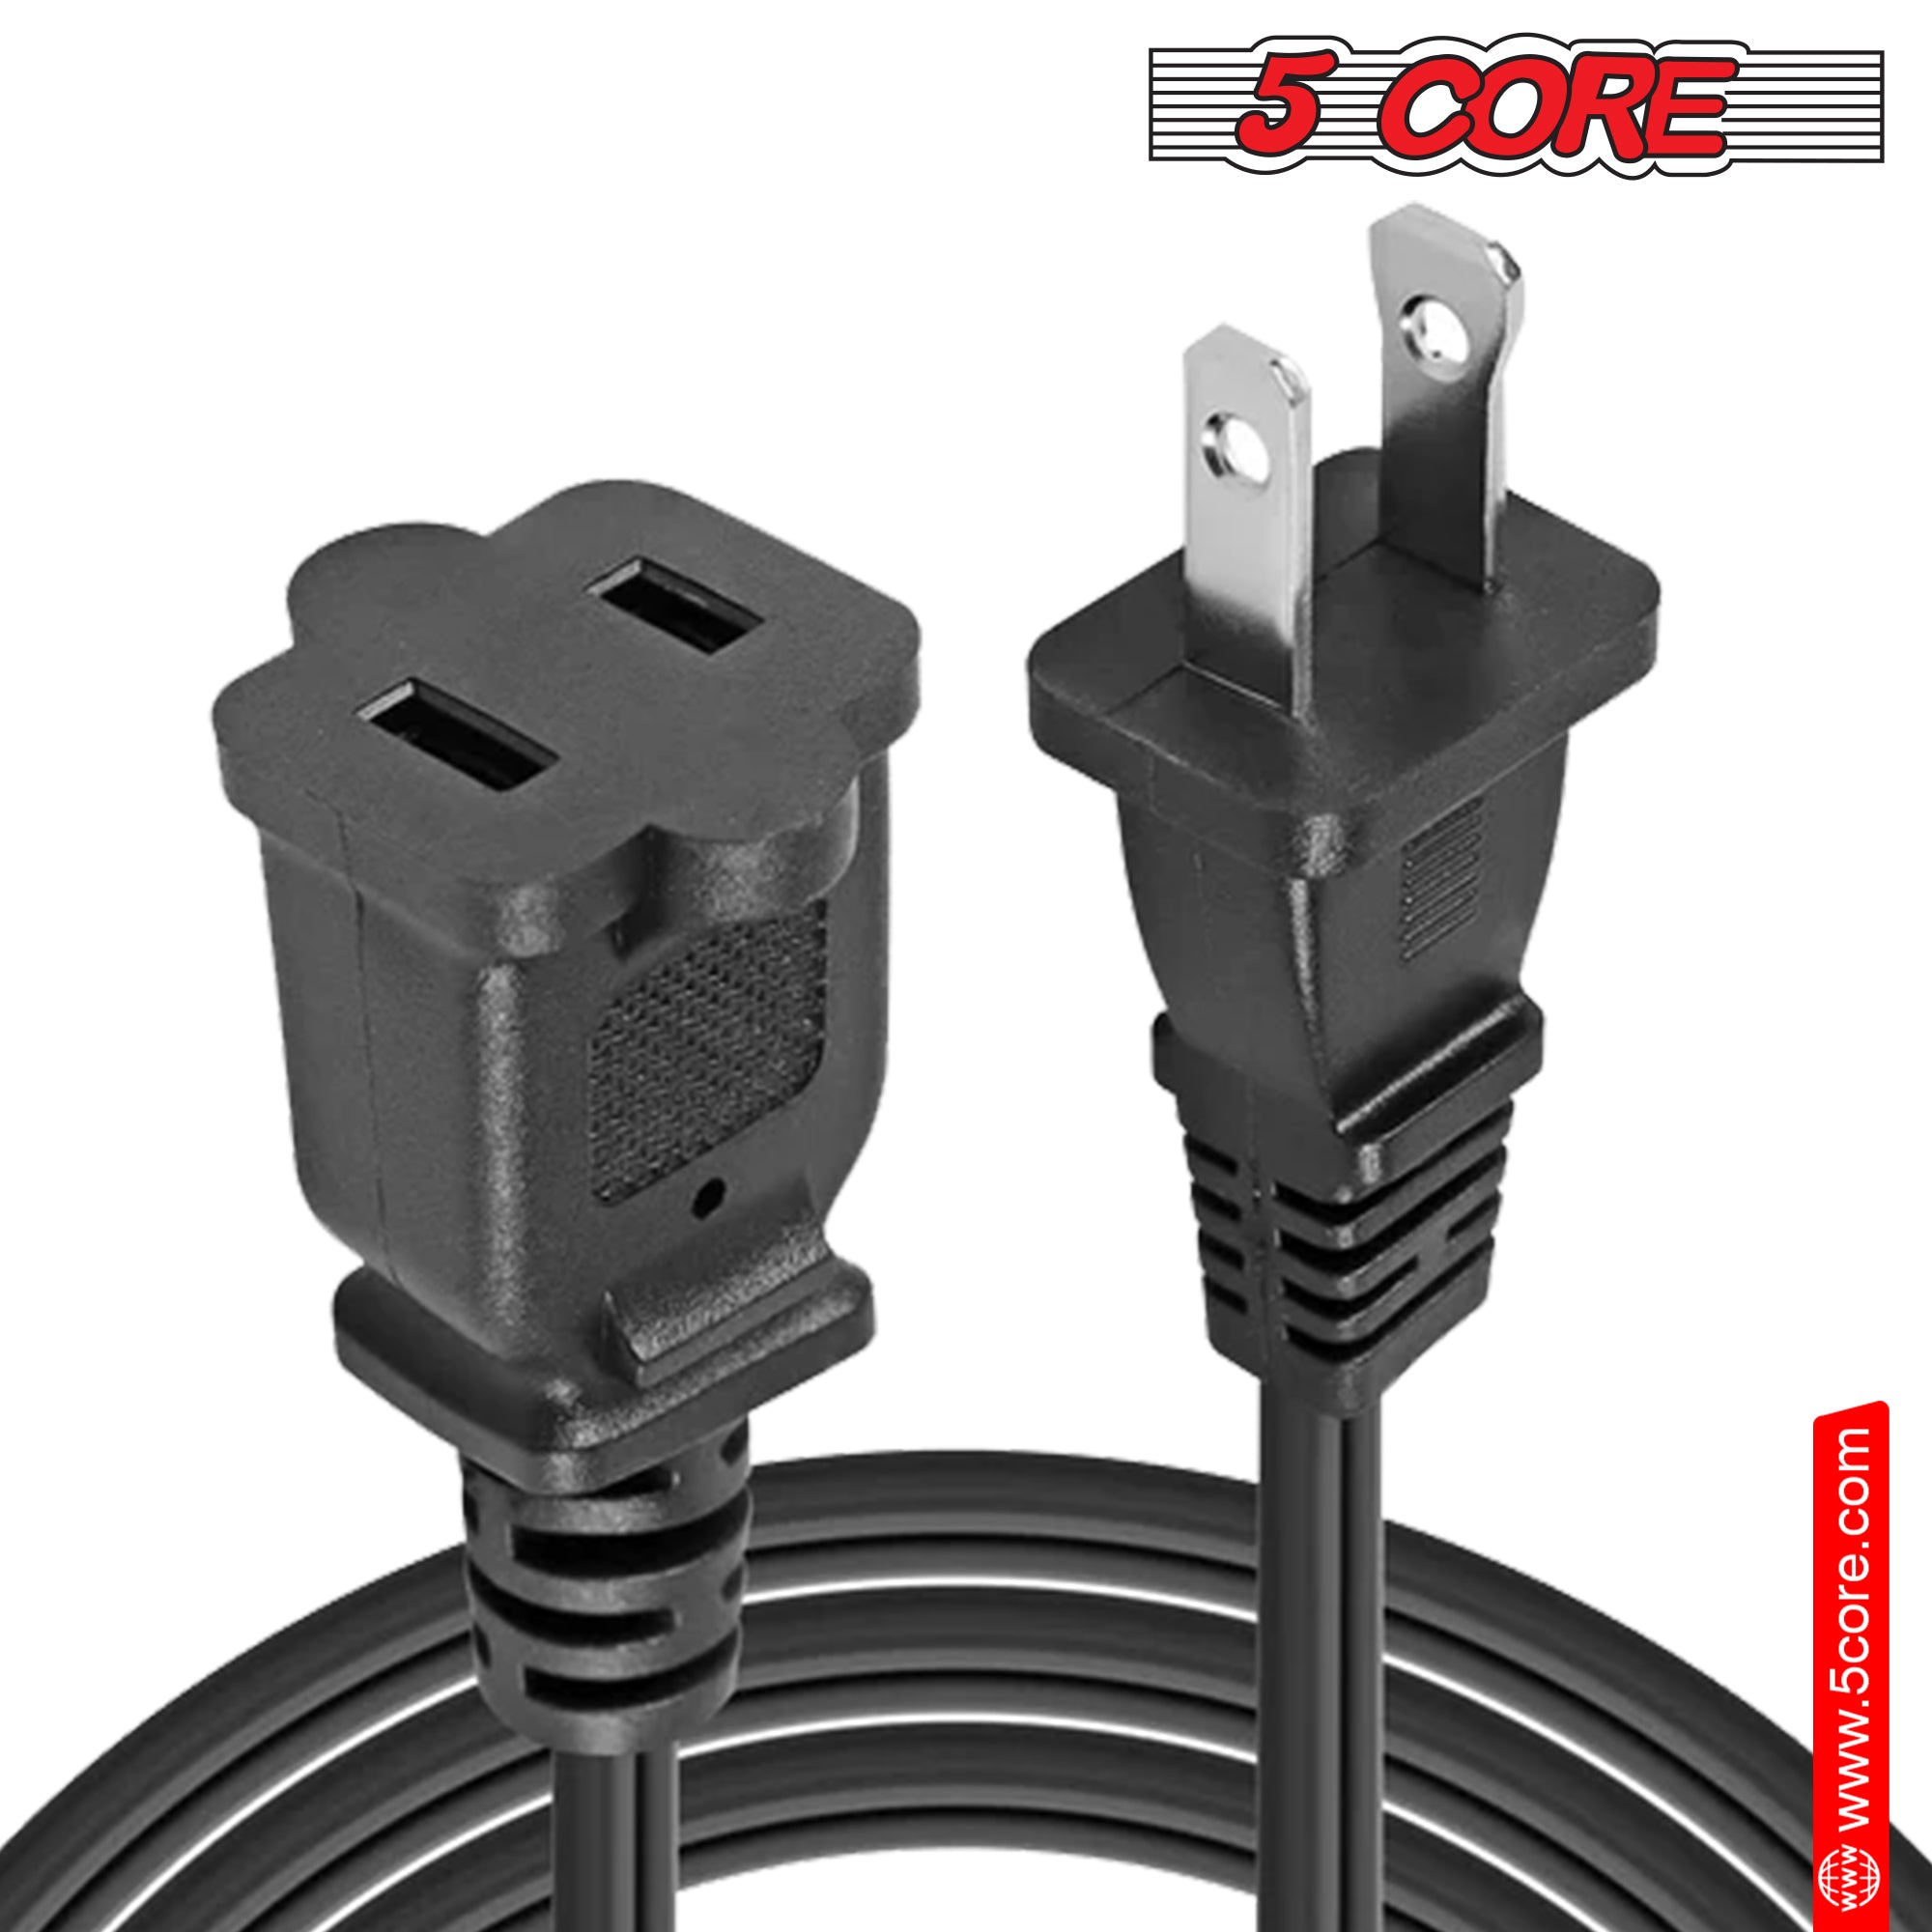 5 Core 2 Prong Extension Cord 12ft Durable Two Prong Extension Cable US AC 2 Prong Christmas Light Extension Cord Outdoor Plug Extender -EXC BLK 12FT